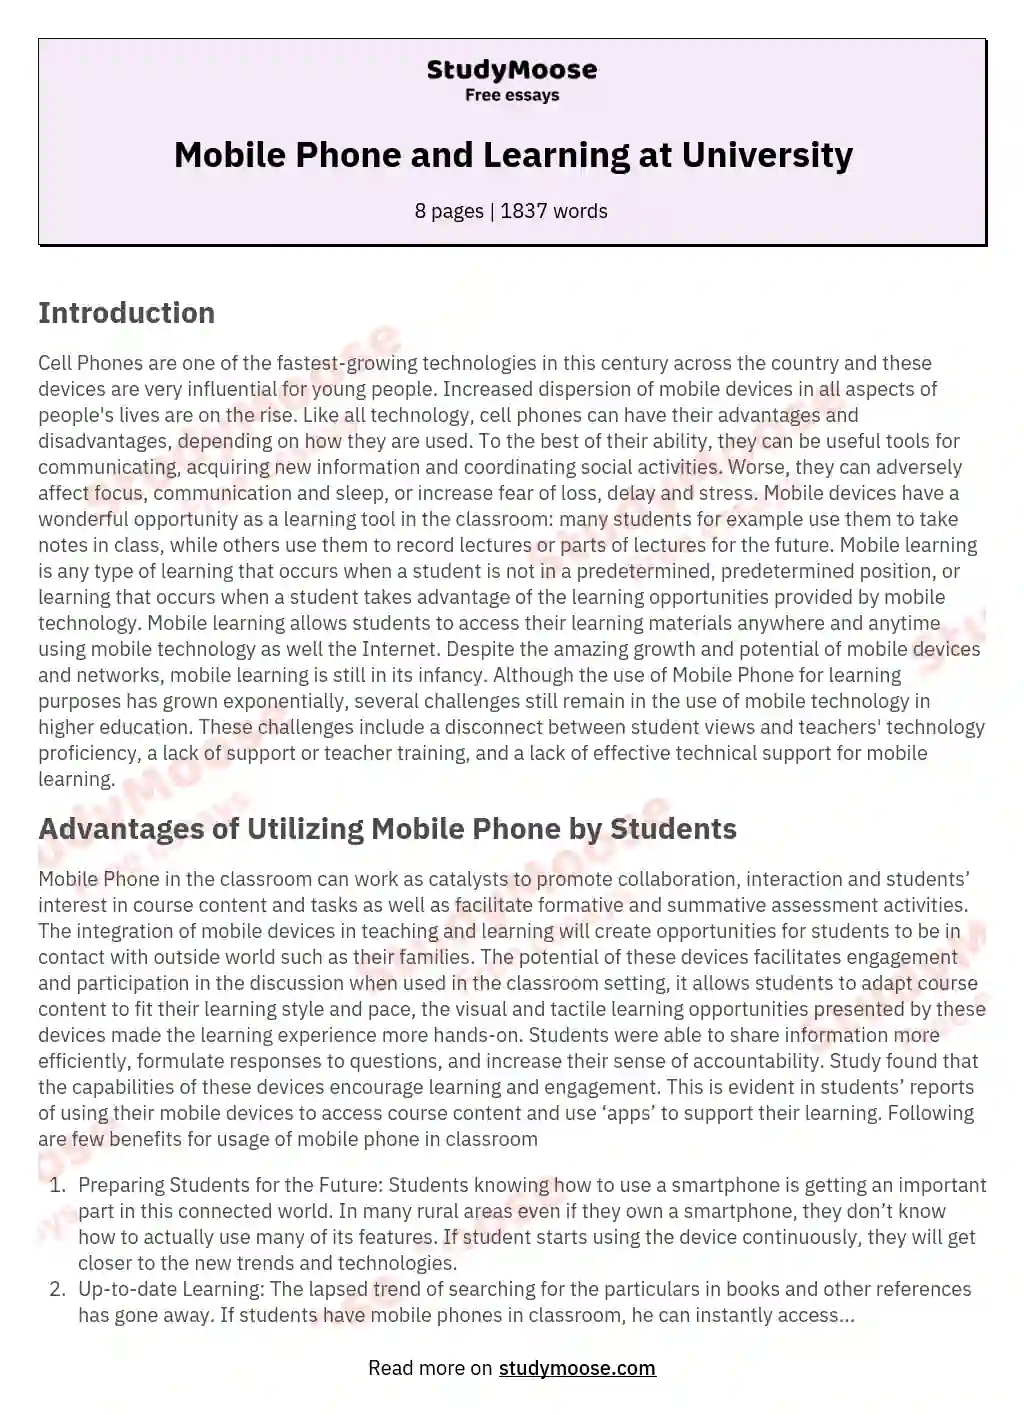 Mobile Phone and Learning at University essay